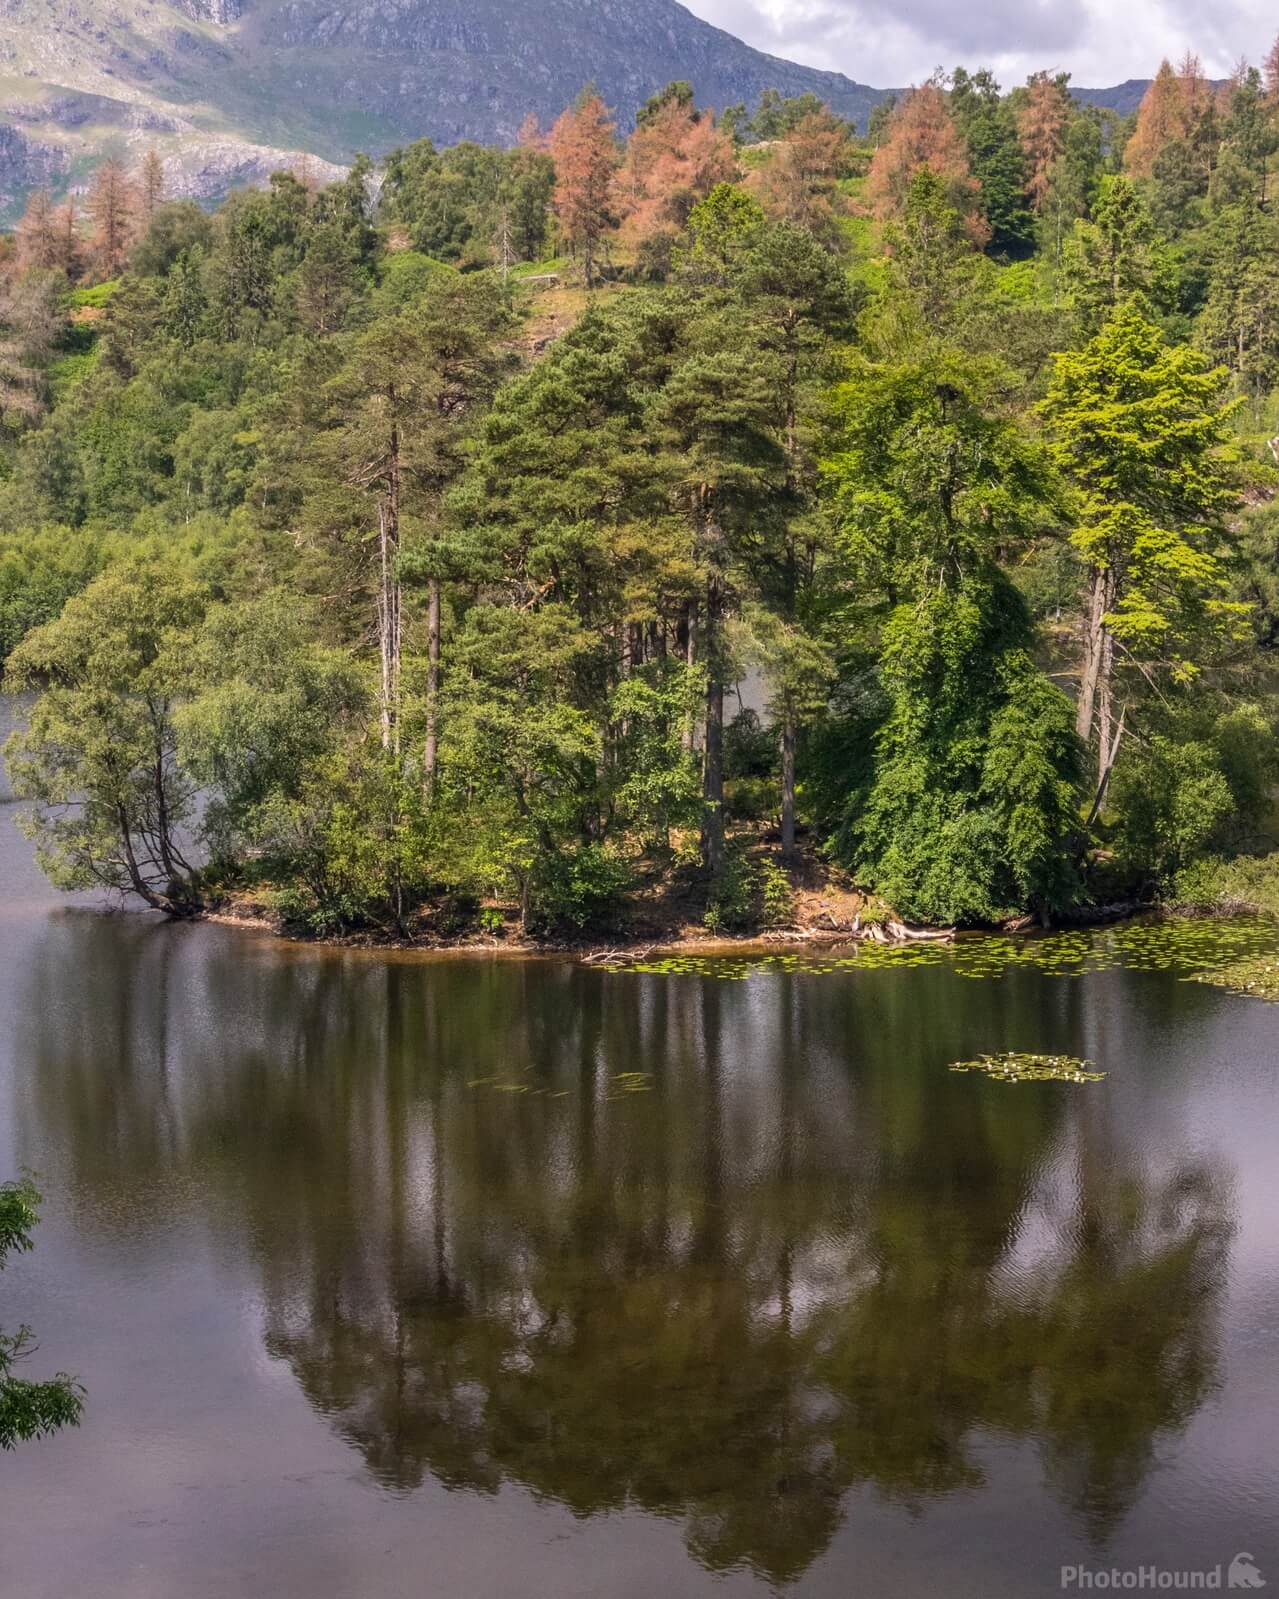 Image of Tarn Hows, Lake District by Andy Killingbeck